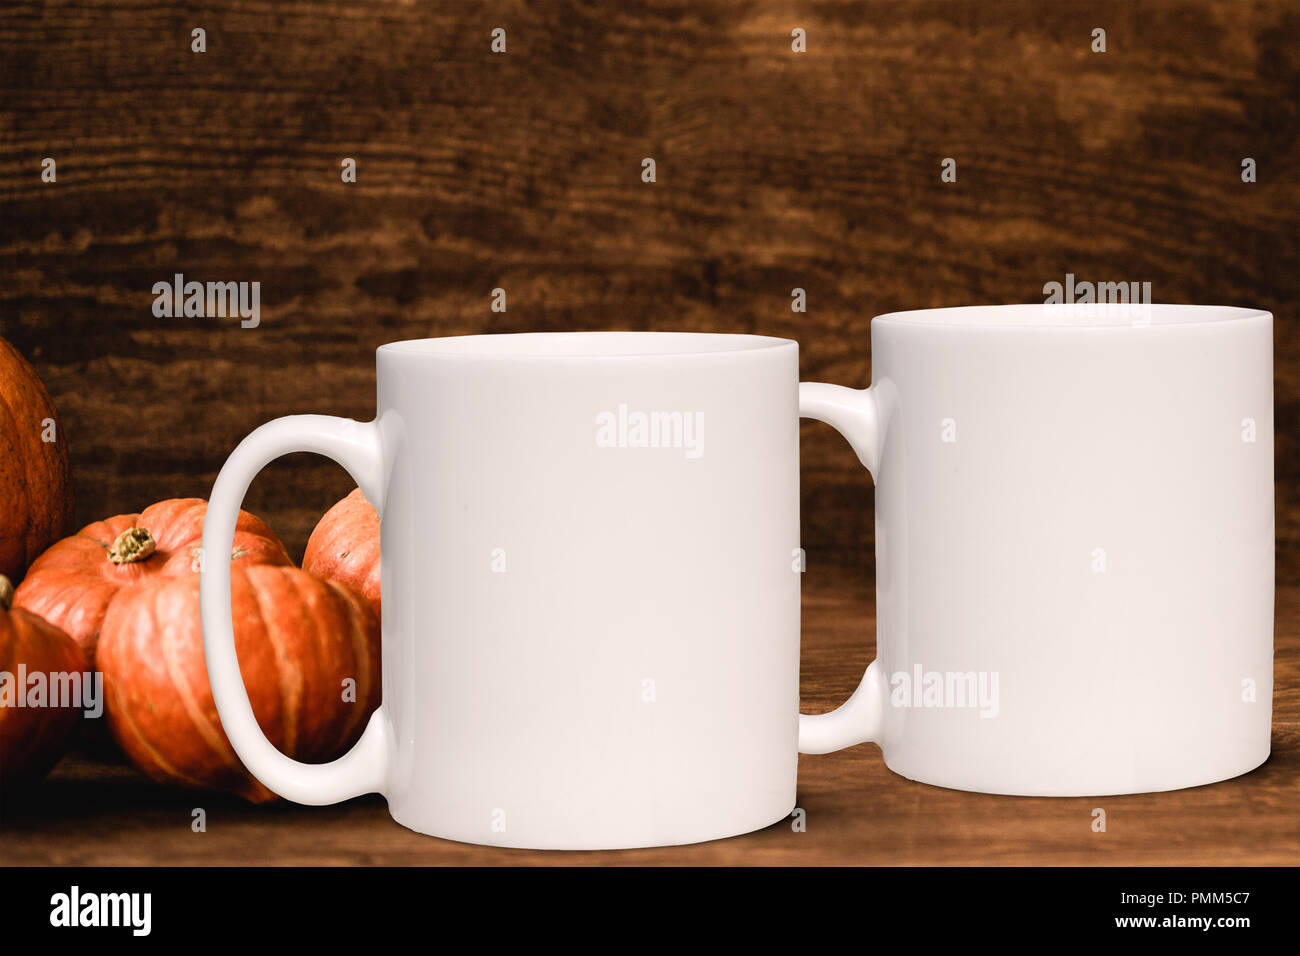 https://c8.alamy.com/comp/PMM5C7/autumnfall-2-mug-mock-up-two-white-blank-coffee-mugs-to-add-custom-design-or-quote-perfect-for-businesses-selling-mugs-just-overlay-your-quote-PMM5C7.jpg